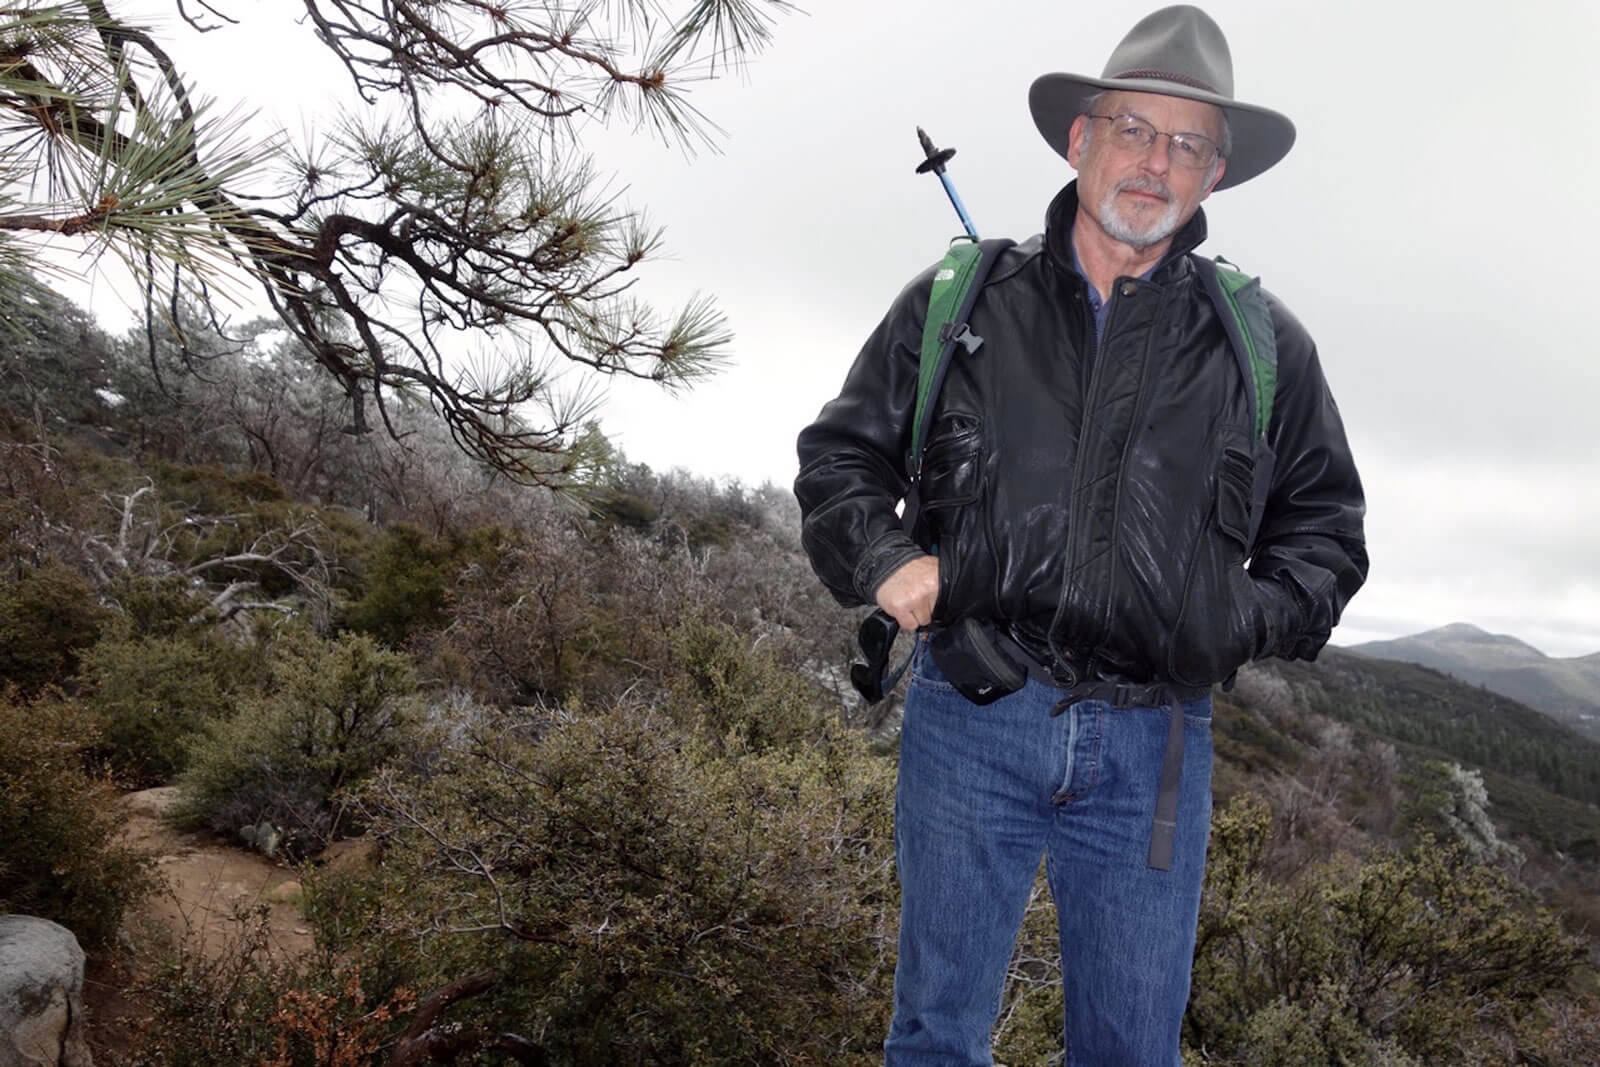 Richard Louv, the author of "Last Child in the Woods" who diagnosed Nature Deficit Disorder.